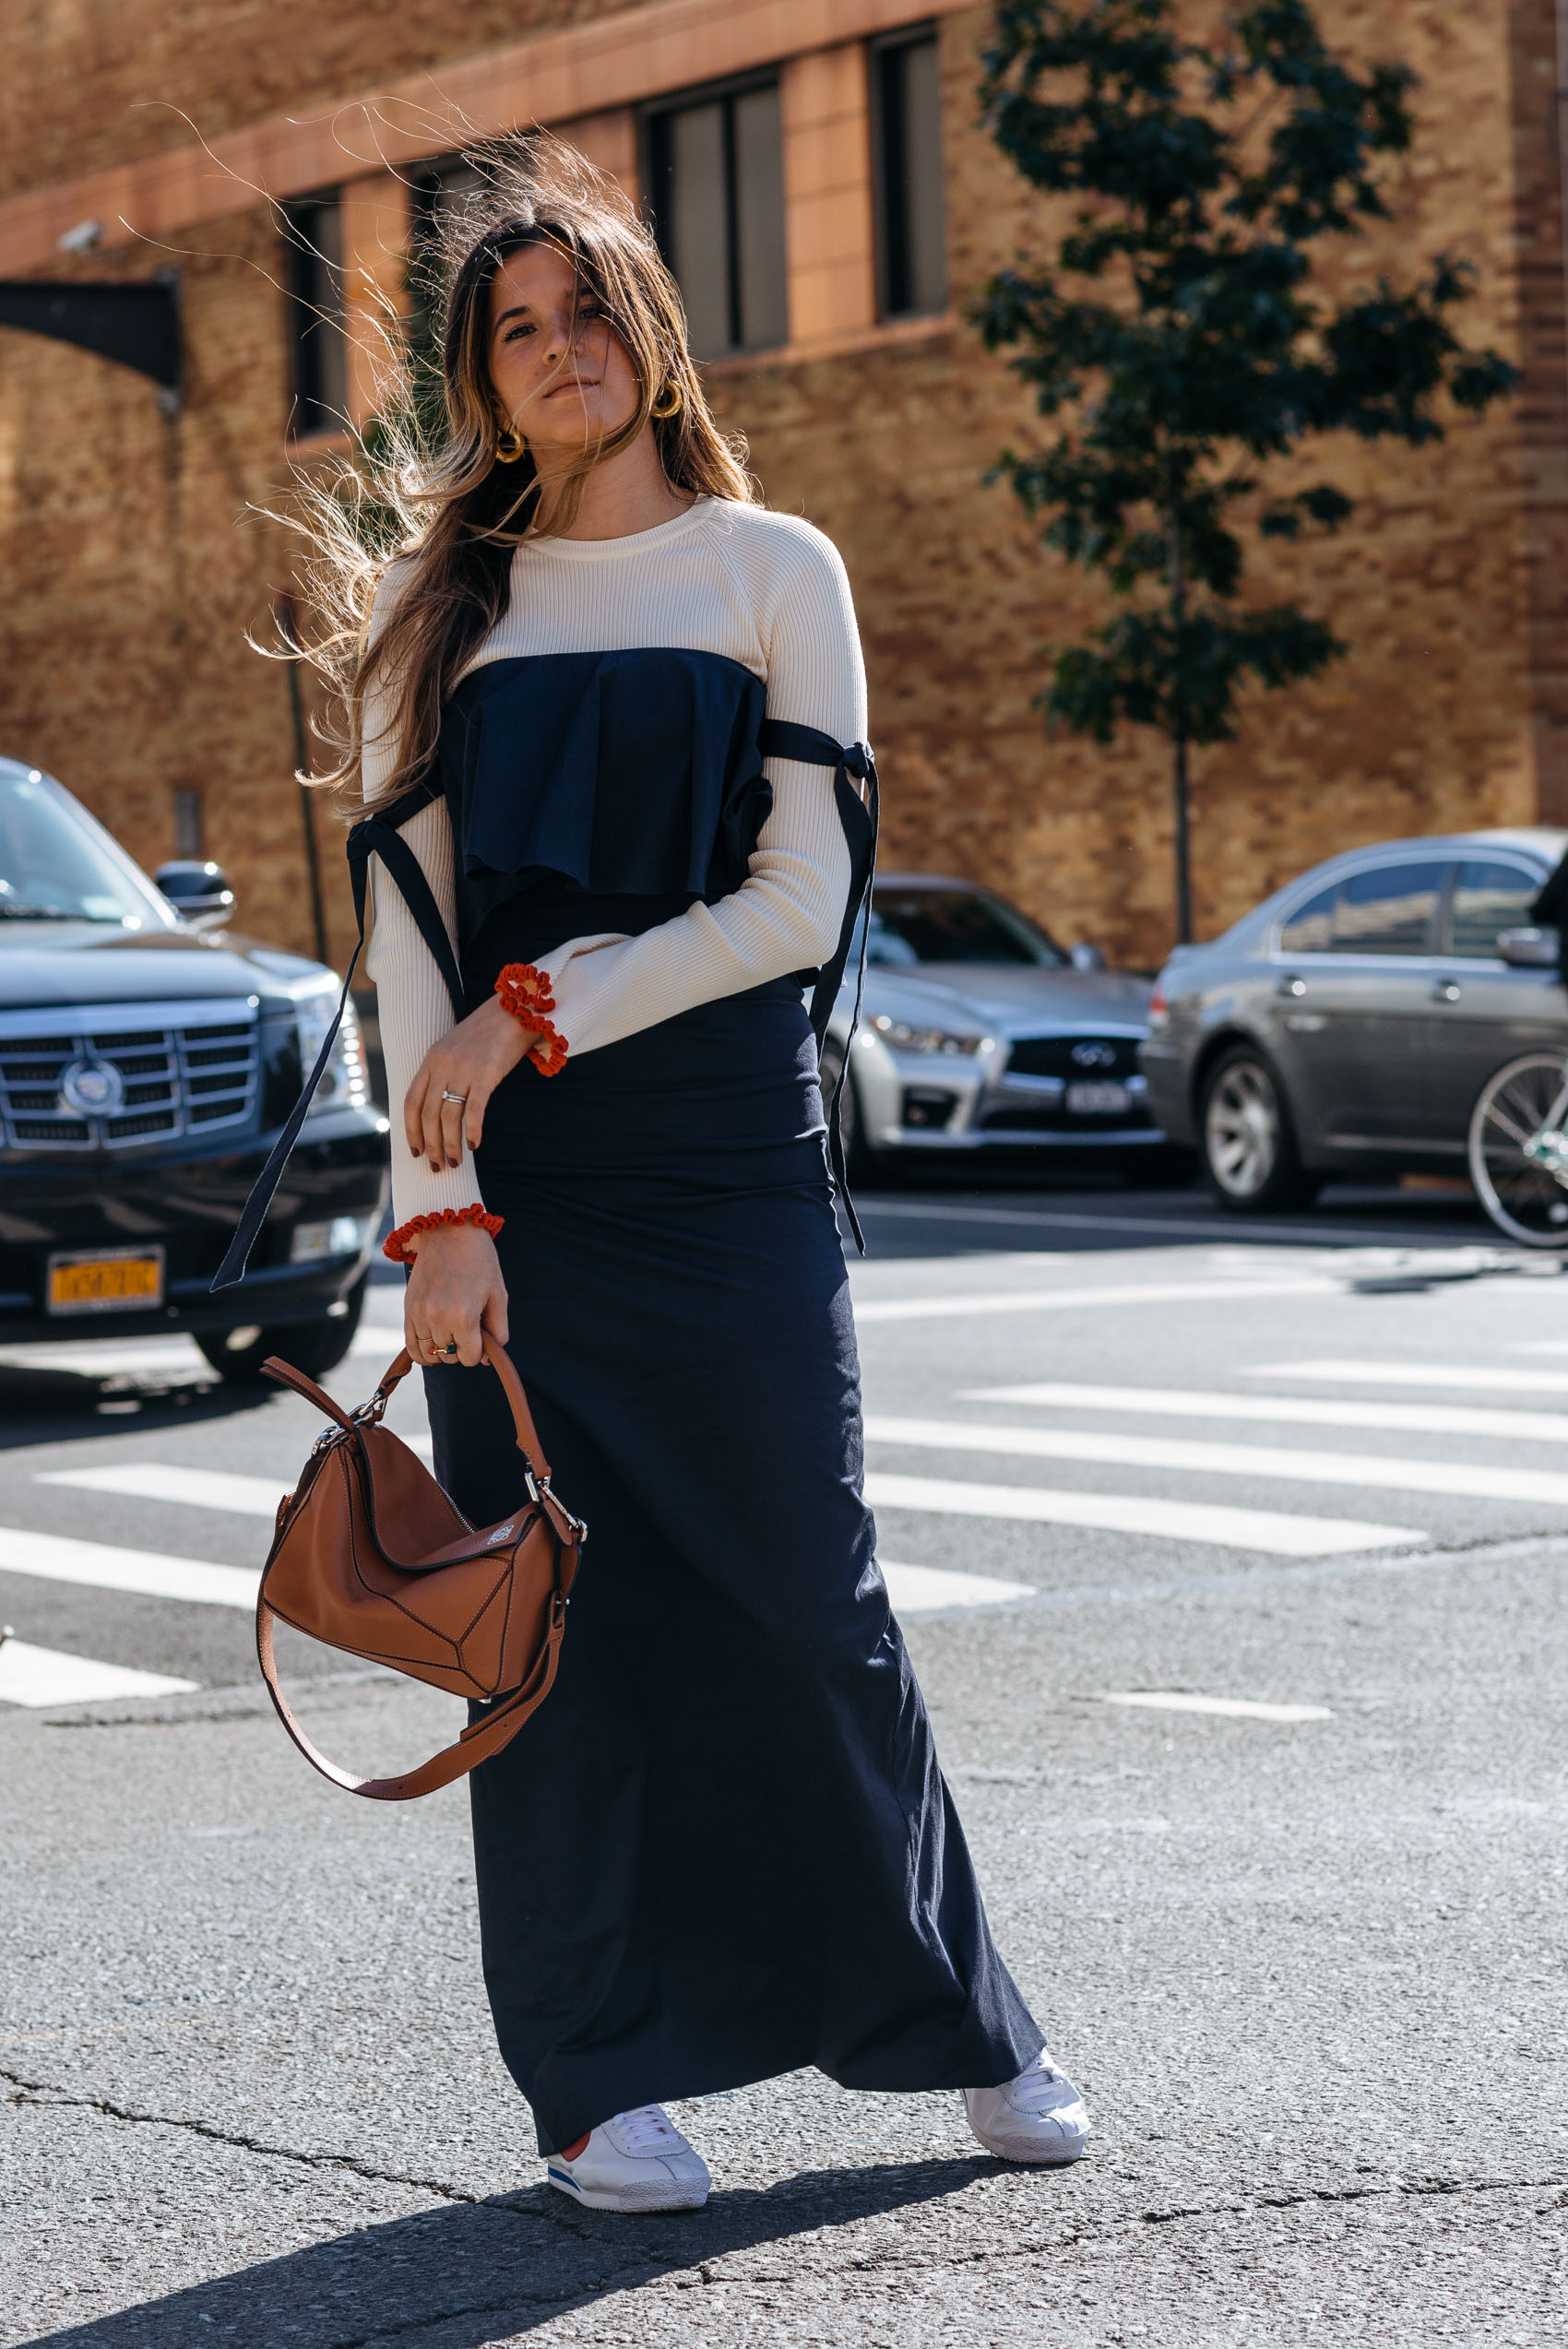 Maristella wearing a chic minimalist outfit with feminine details for Fall